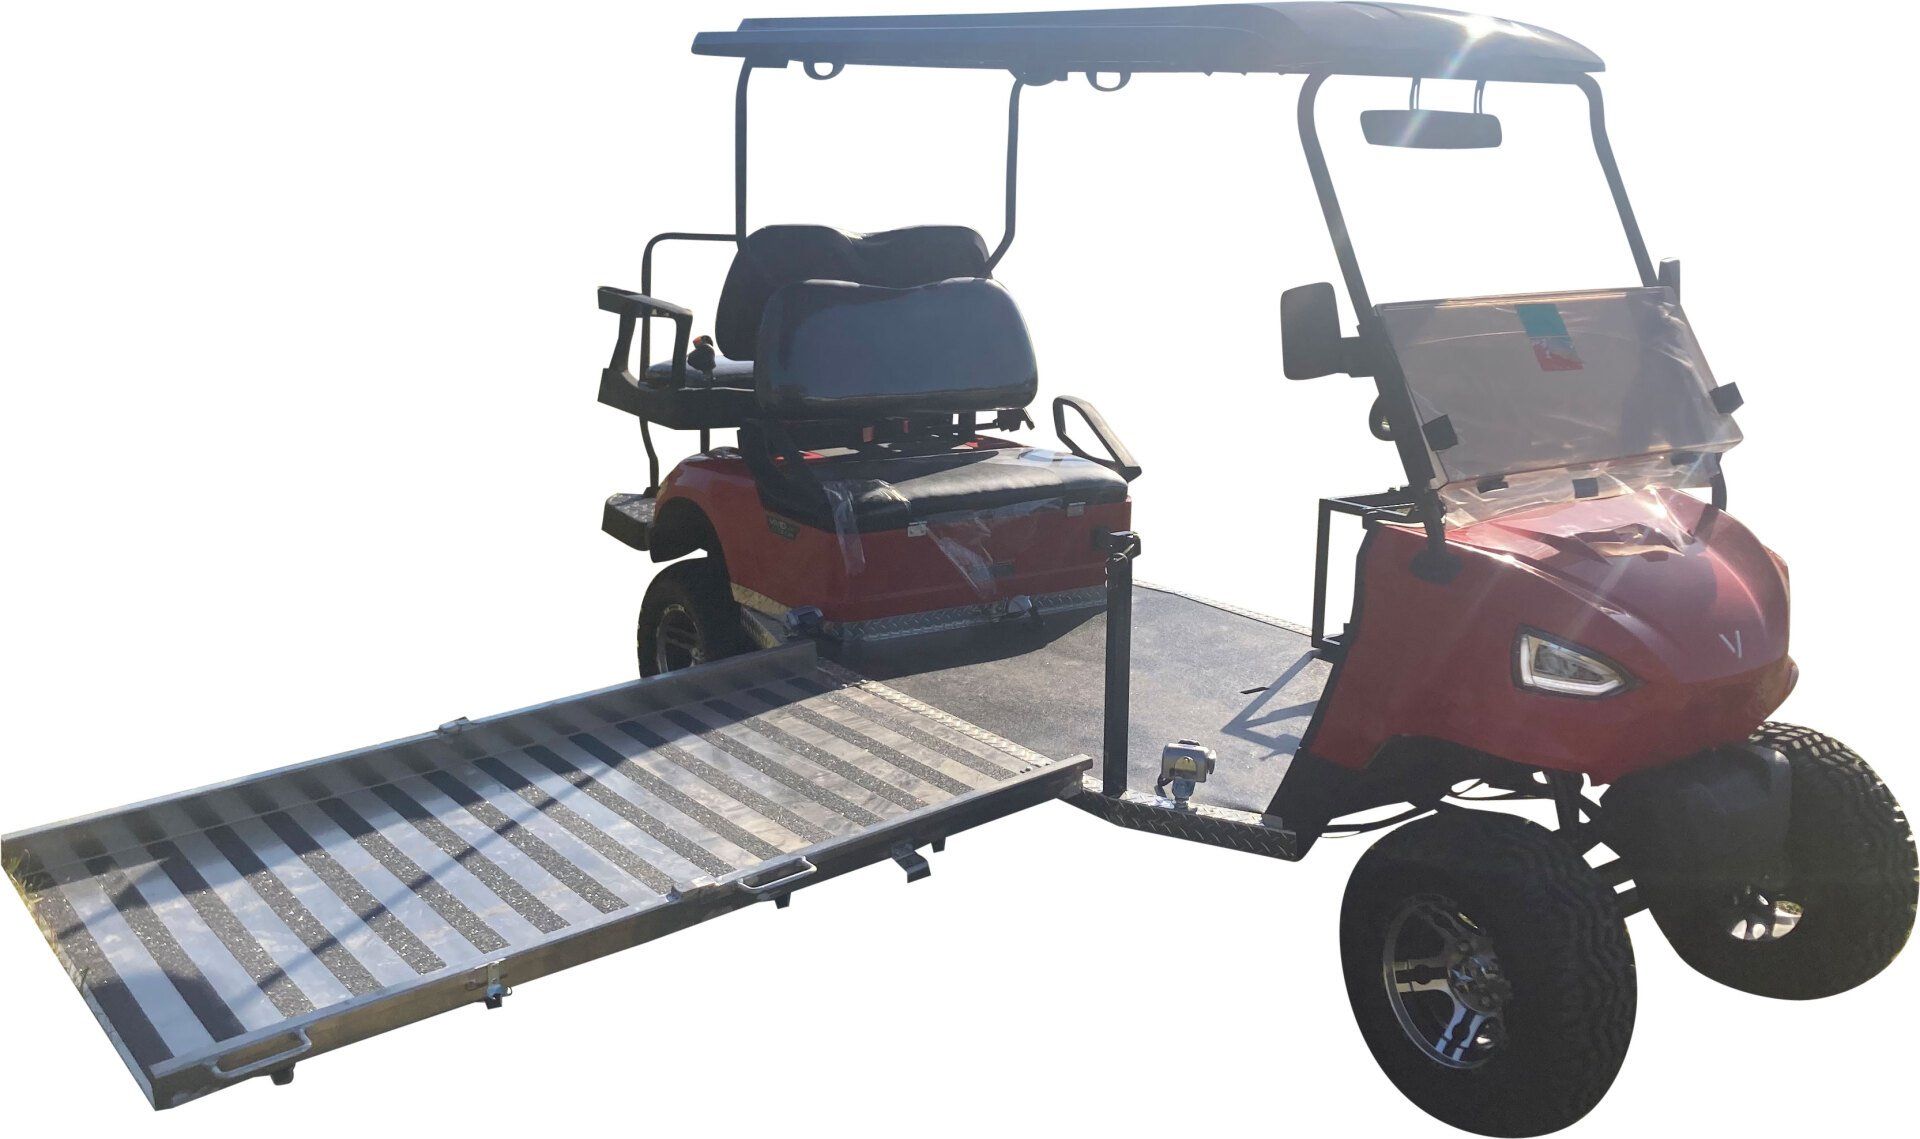 Orange wheelchair golf cart from PHED Mobility